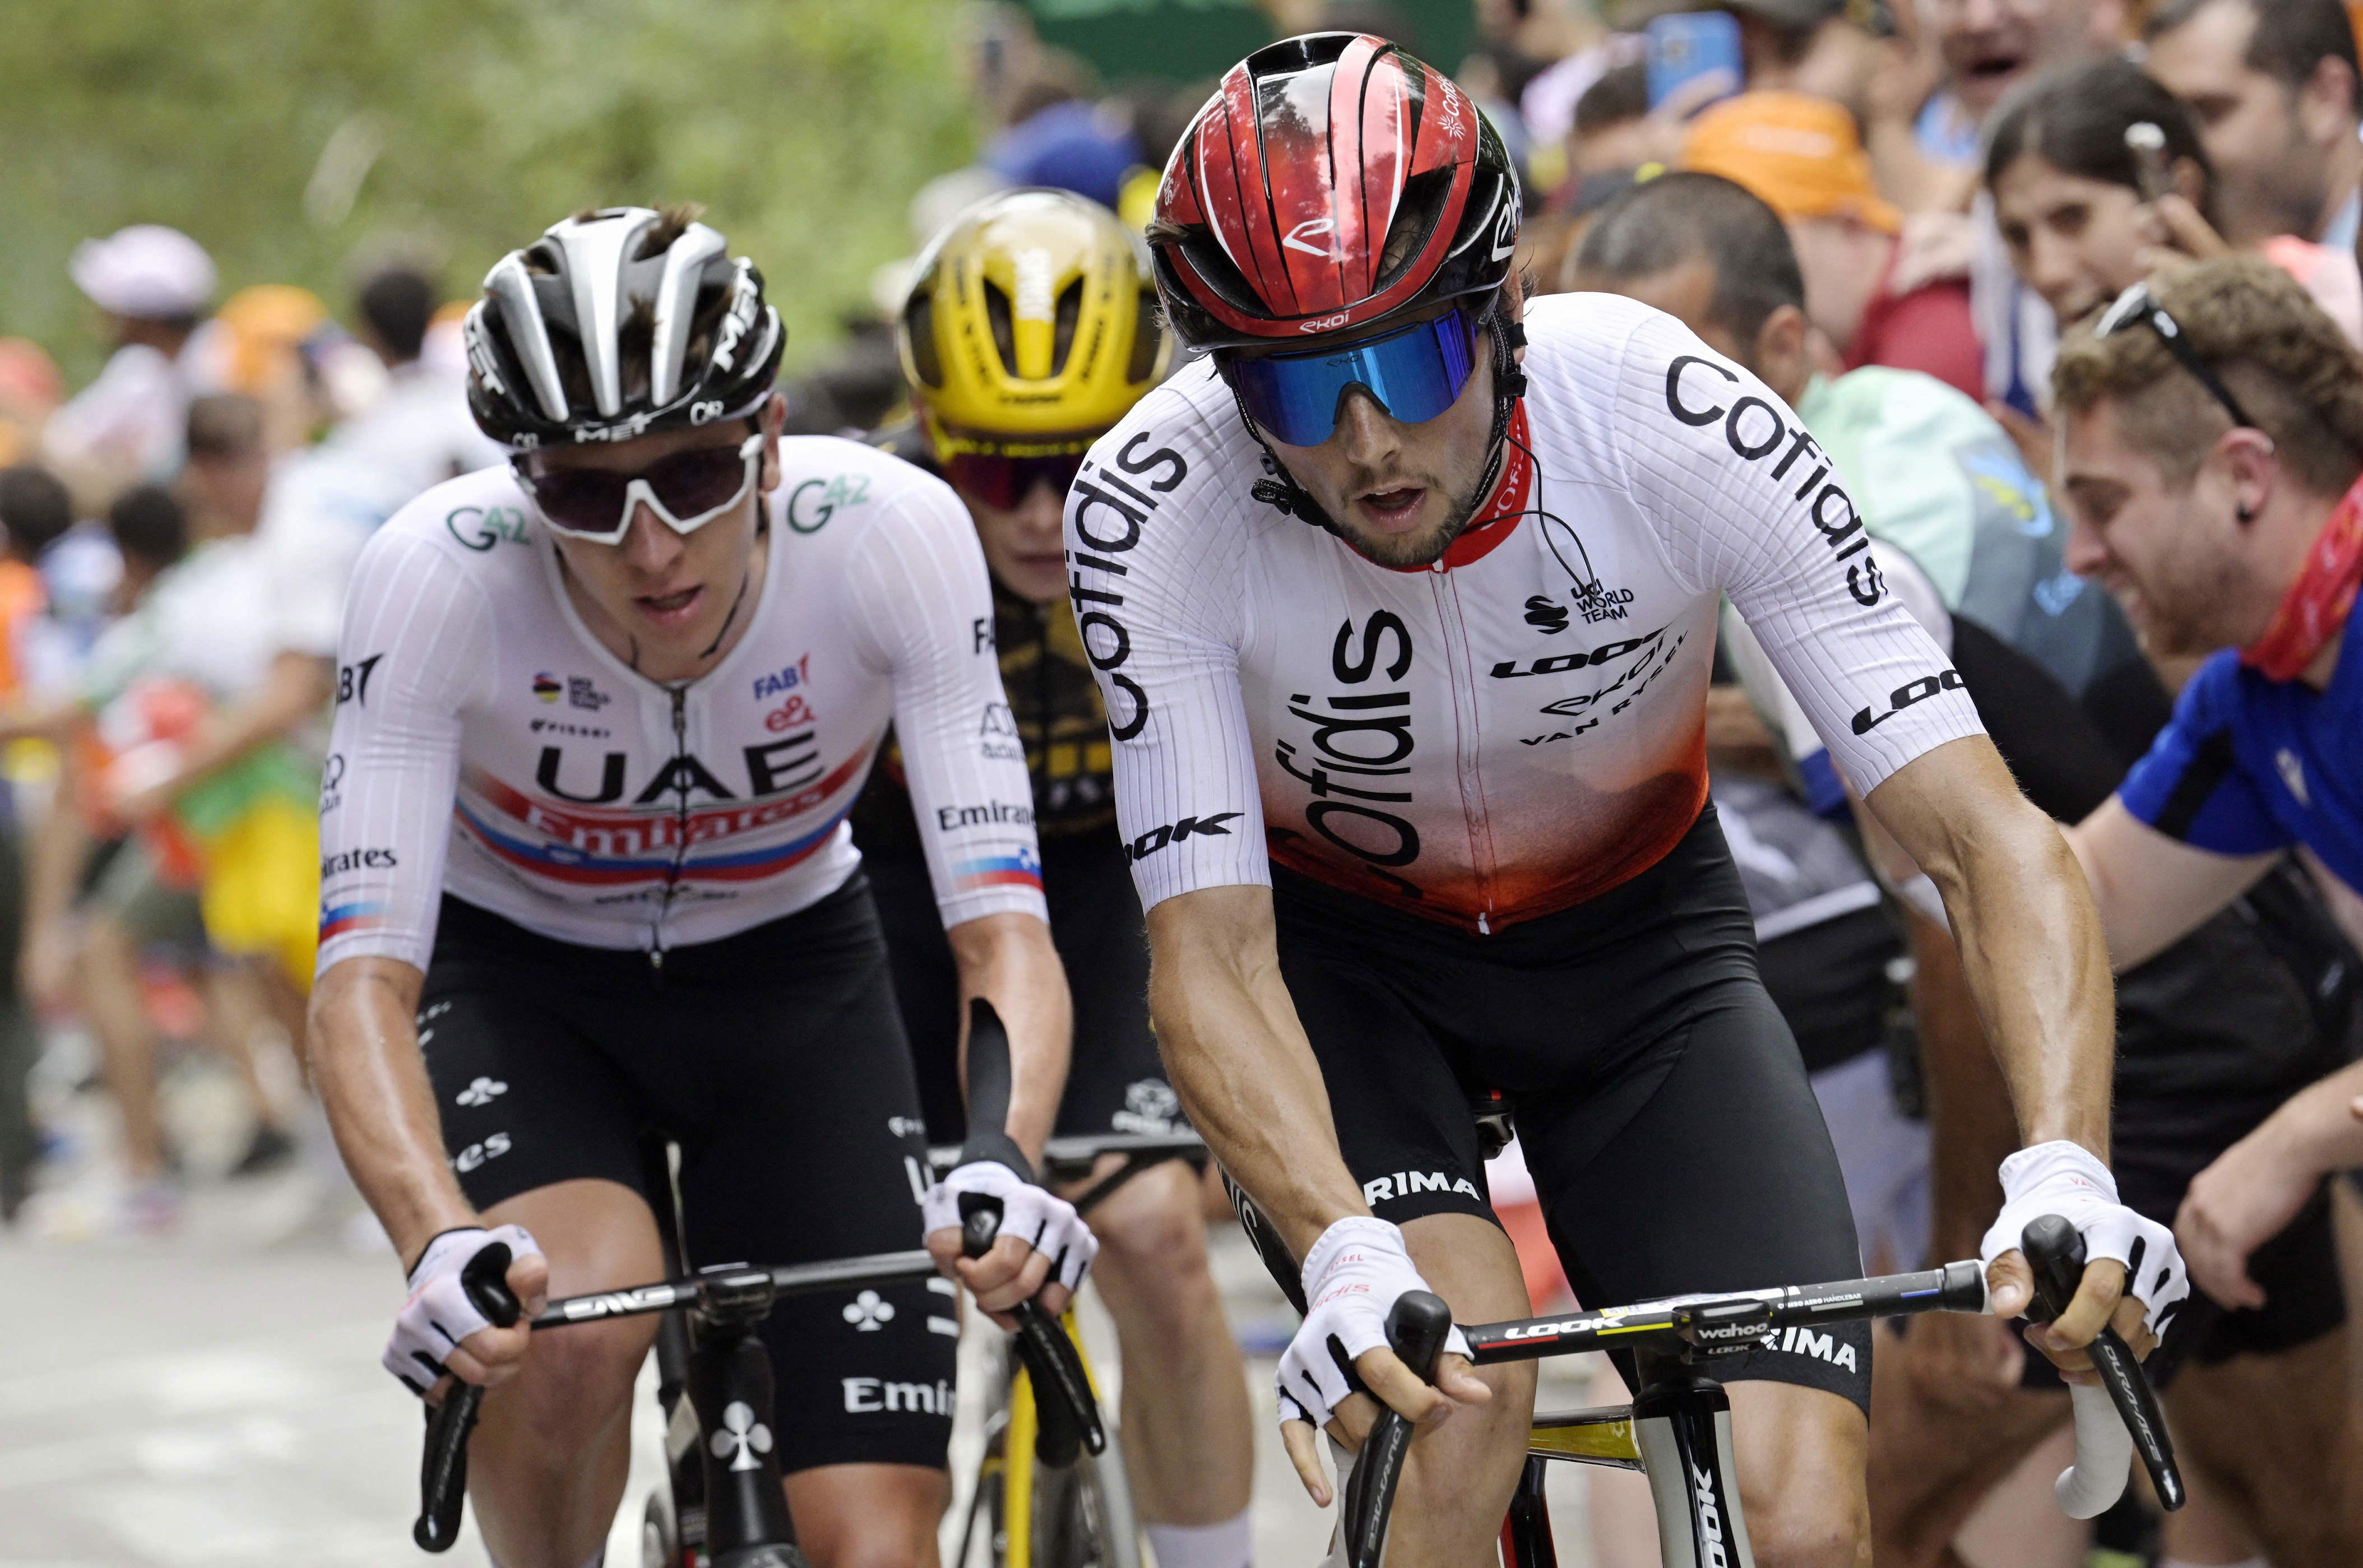 Tour de France 2023 on TV how to stream live and watch highlights on ITV4, Discovery+, Eurosport, and S4C